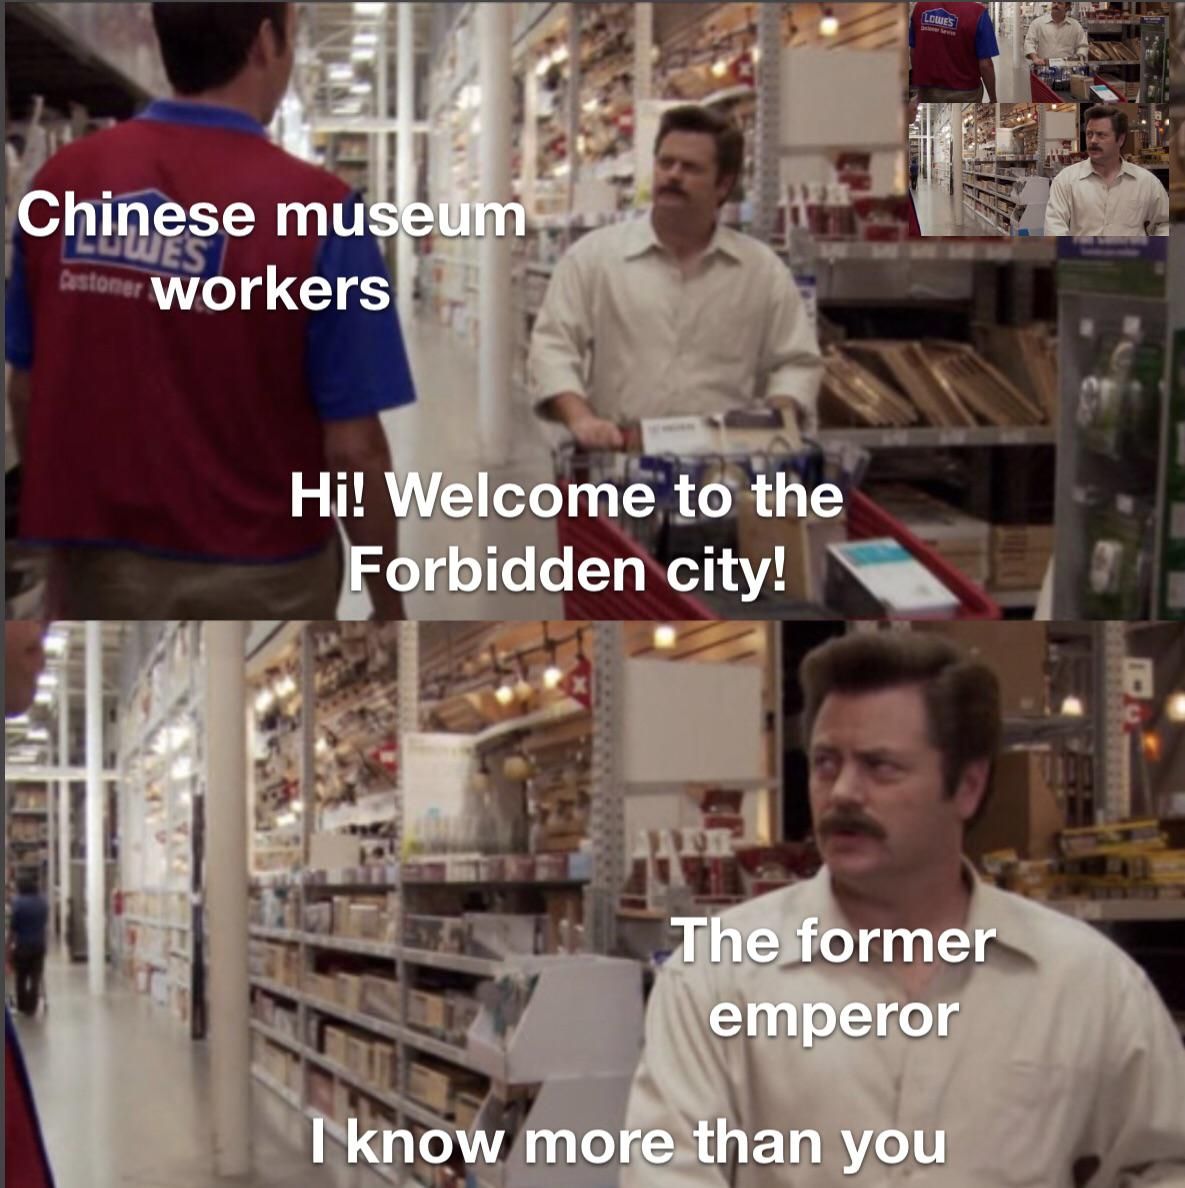 The final emperor of China was allowed to visit his former palace as a tourist and this is how I imagine the interaction went.